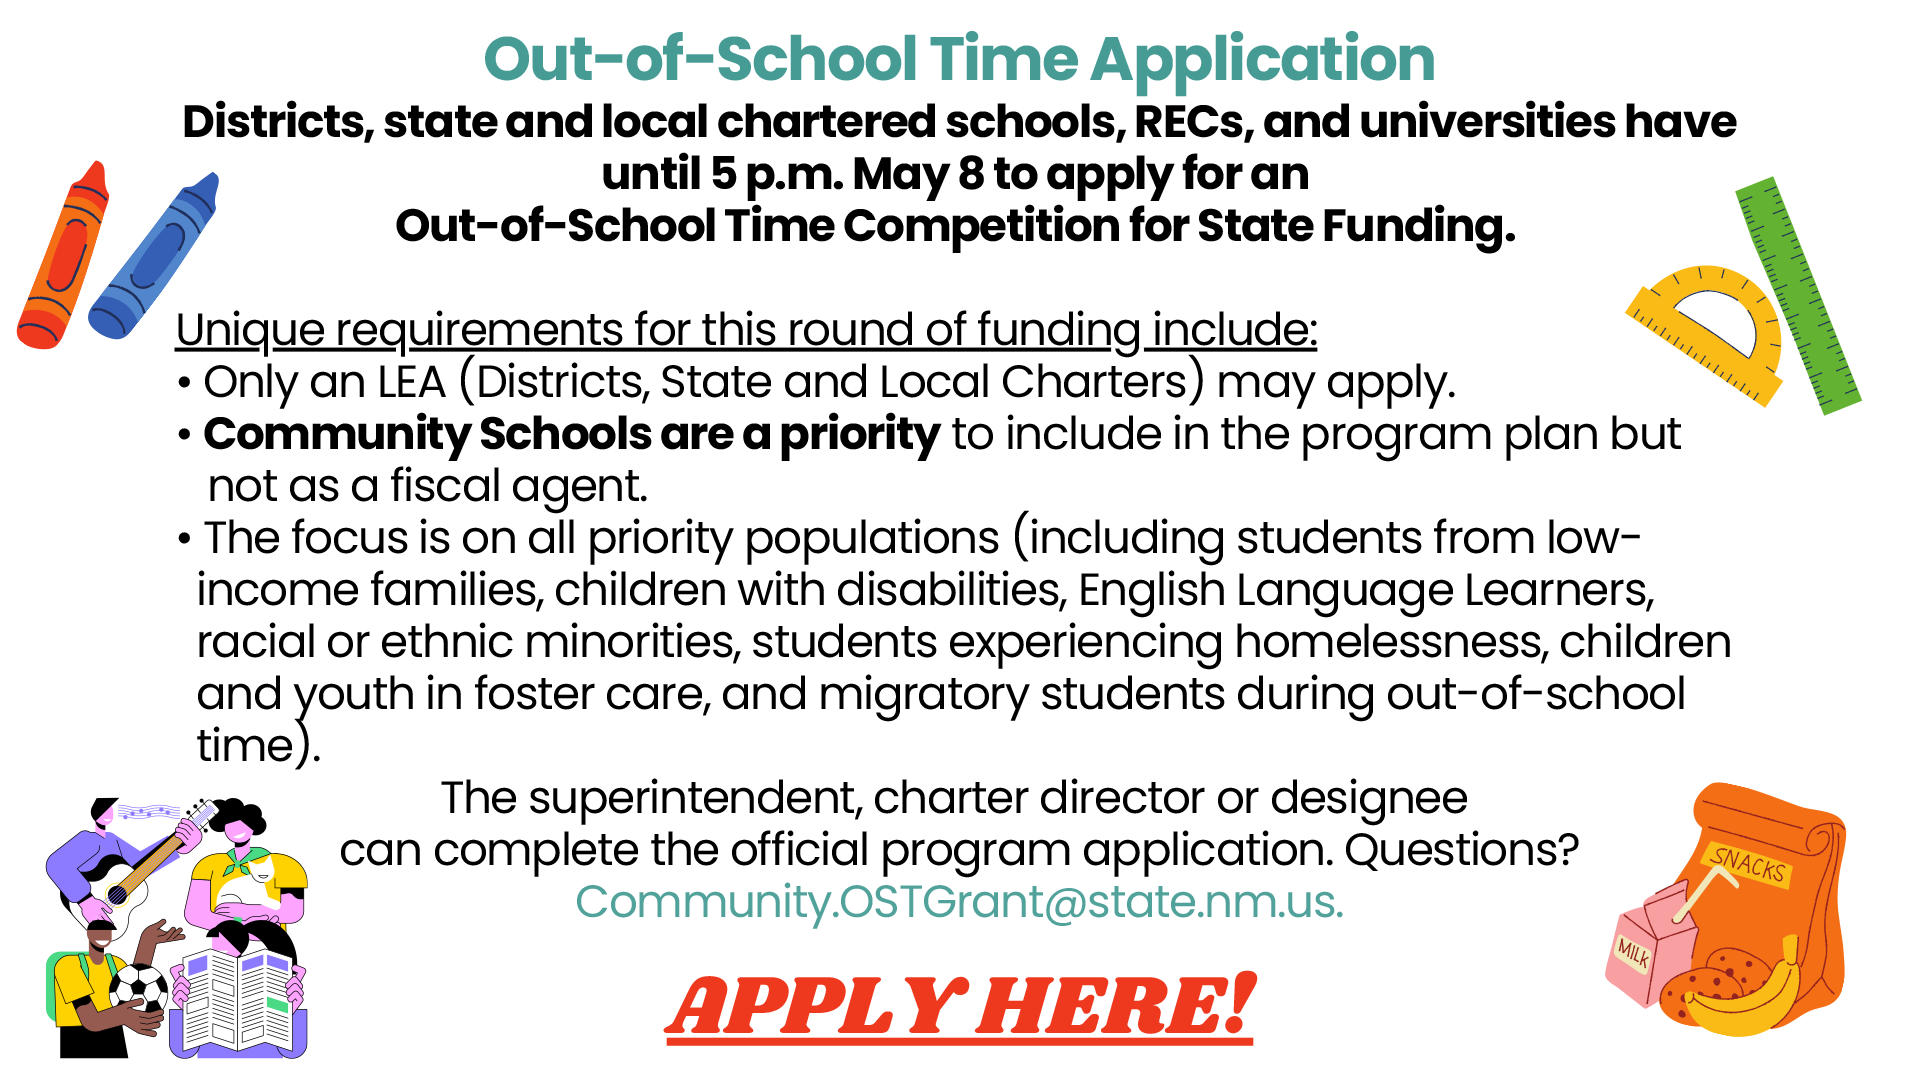 Out-of-School Time Application. Districts, state and local chartered schools, RECs, and universities have until 5 p.m. May 8 to apply for an Out-of-School Time Competition for State Funding. Unique requirements for this round of funding include: Only an LEA (Districts, State and Local Charters) may apply. Community Schools are a priority to include in the program plan but not as a fiscal agent. The focus is on all priority populations (including students from lowincome families, children with disabilities, English Language Learners, racial or ethnic minorities, students experiencing homelessness, children and youth in foster care, and migratory students during out-of-school time). The superintendent, charter director or designee can complete the official program application. Questions? Community.OSTGrant@state.nm.us APPLY HERE!